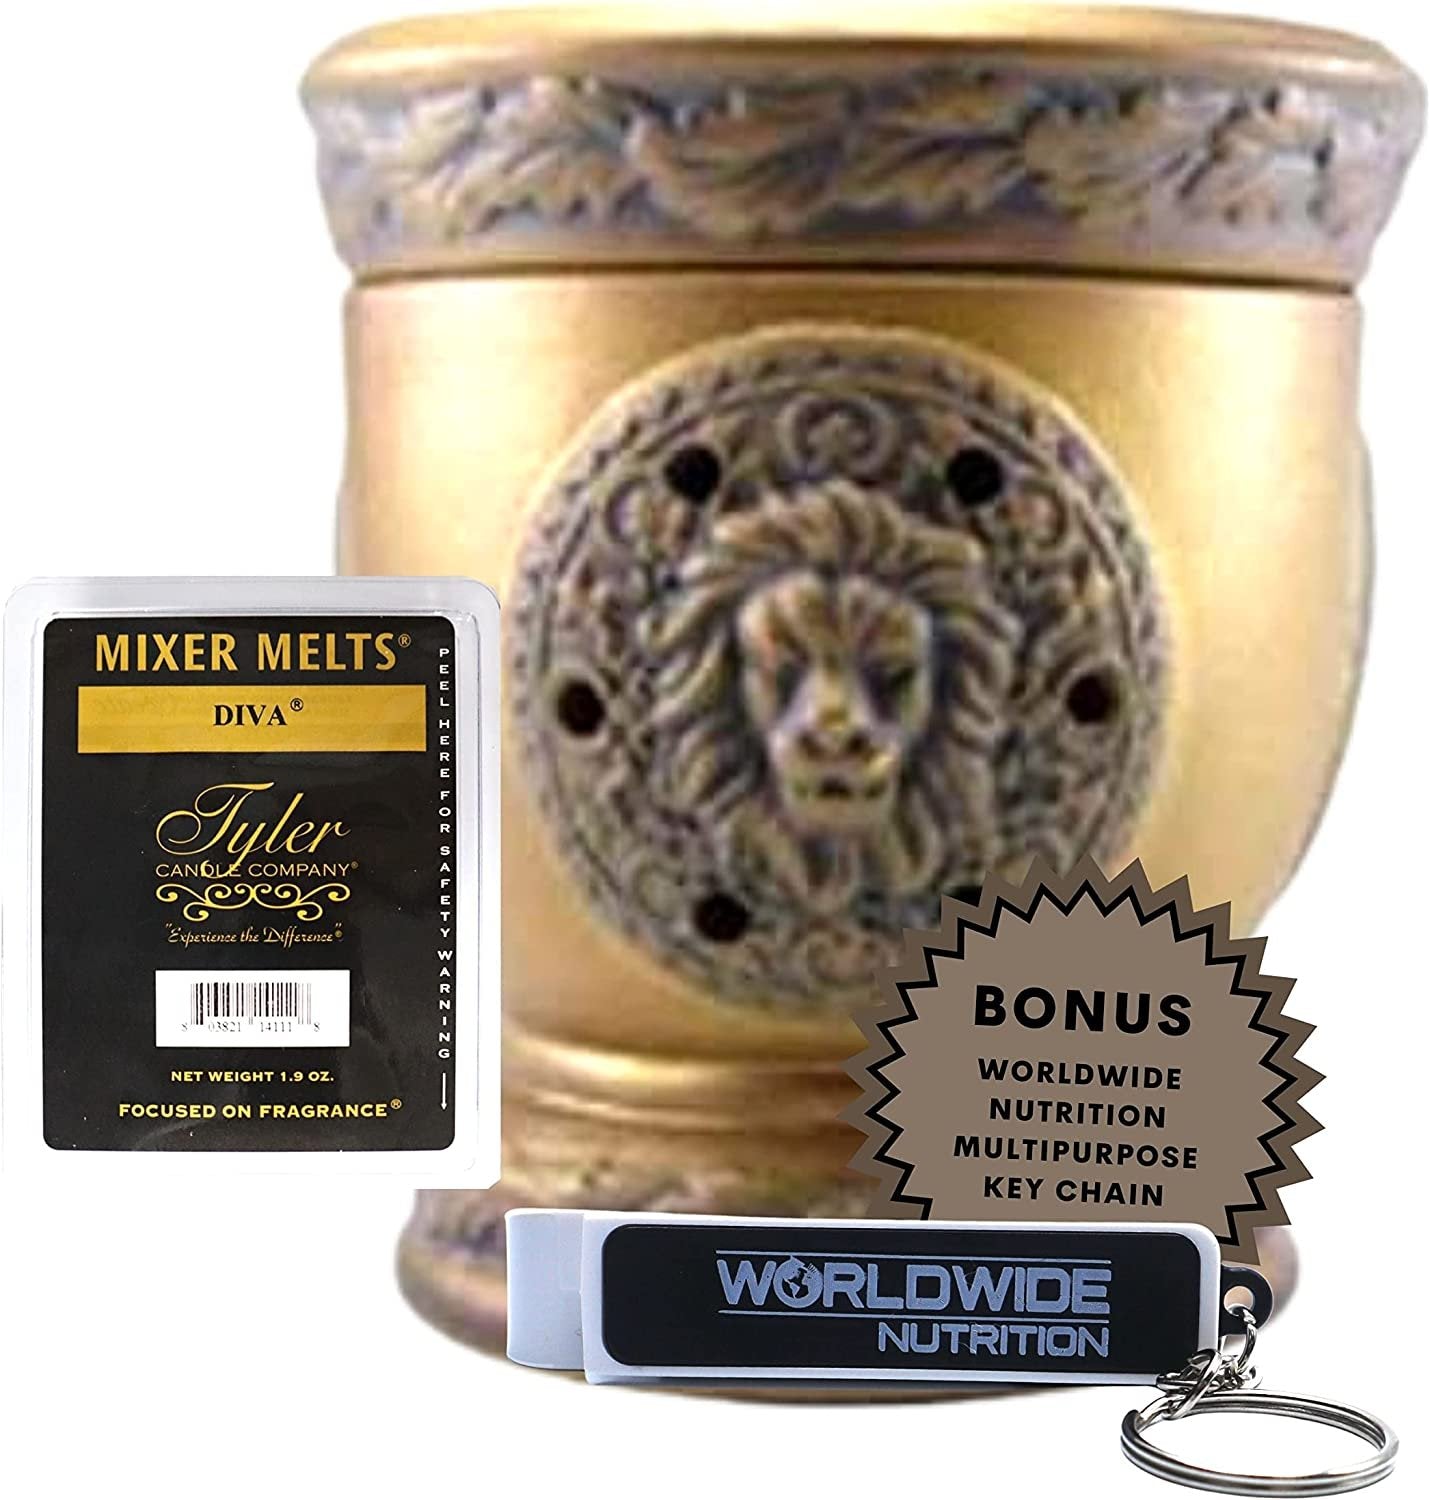 Tyler Candle Company Lionesque Matte Bronze Fragrance Wax Warmer - Candle Wax Melt Warmer - Home Decor Candle Accessories with Included 6 Diva Scent Wax Melts - 5.5 x 5" in with Bonus Key Chain